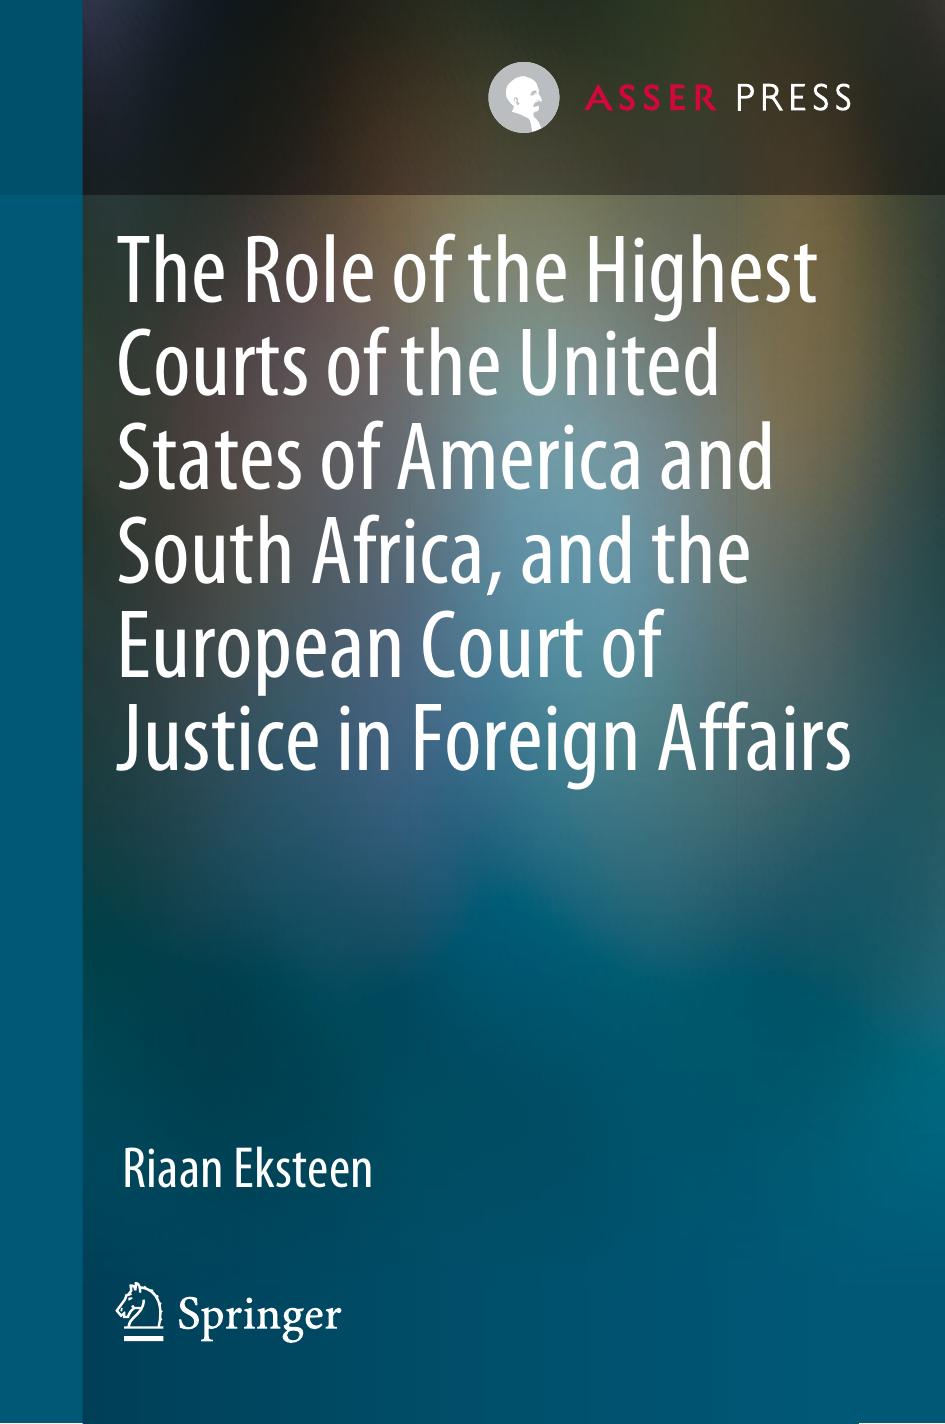 The Role of the Highest Courts of the United States of America and South Africa, and the European Court of Justice in Foreign Affairs by Riaan Eksteen